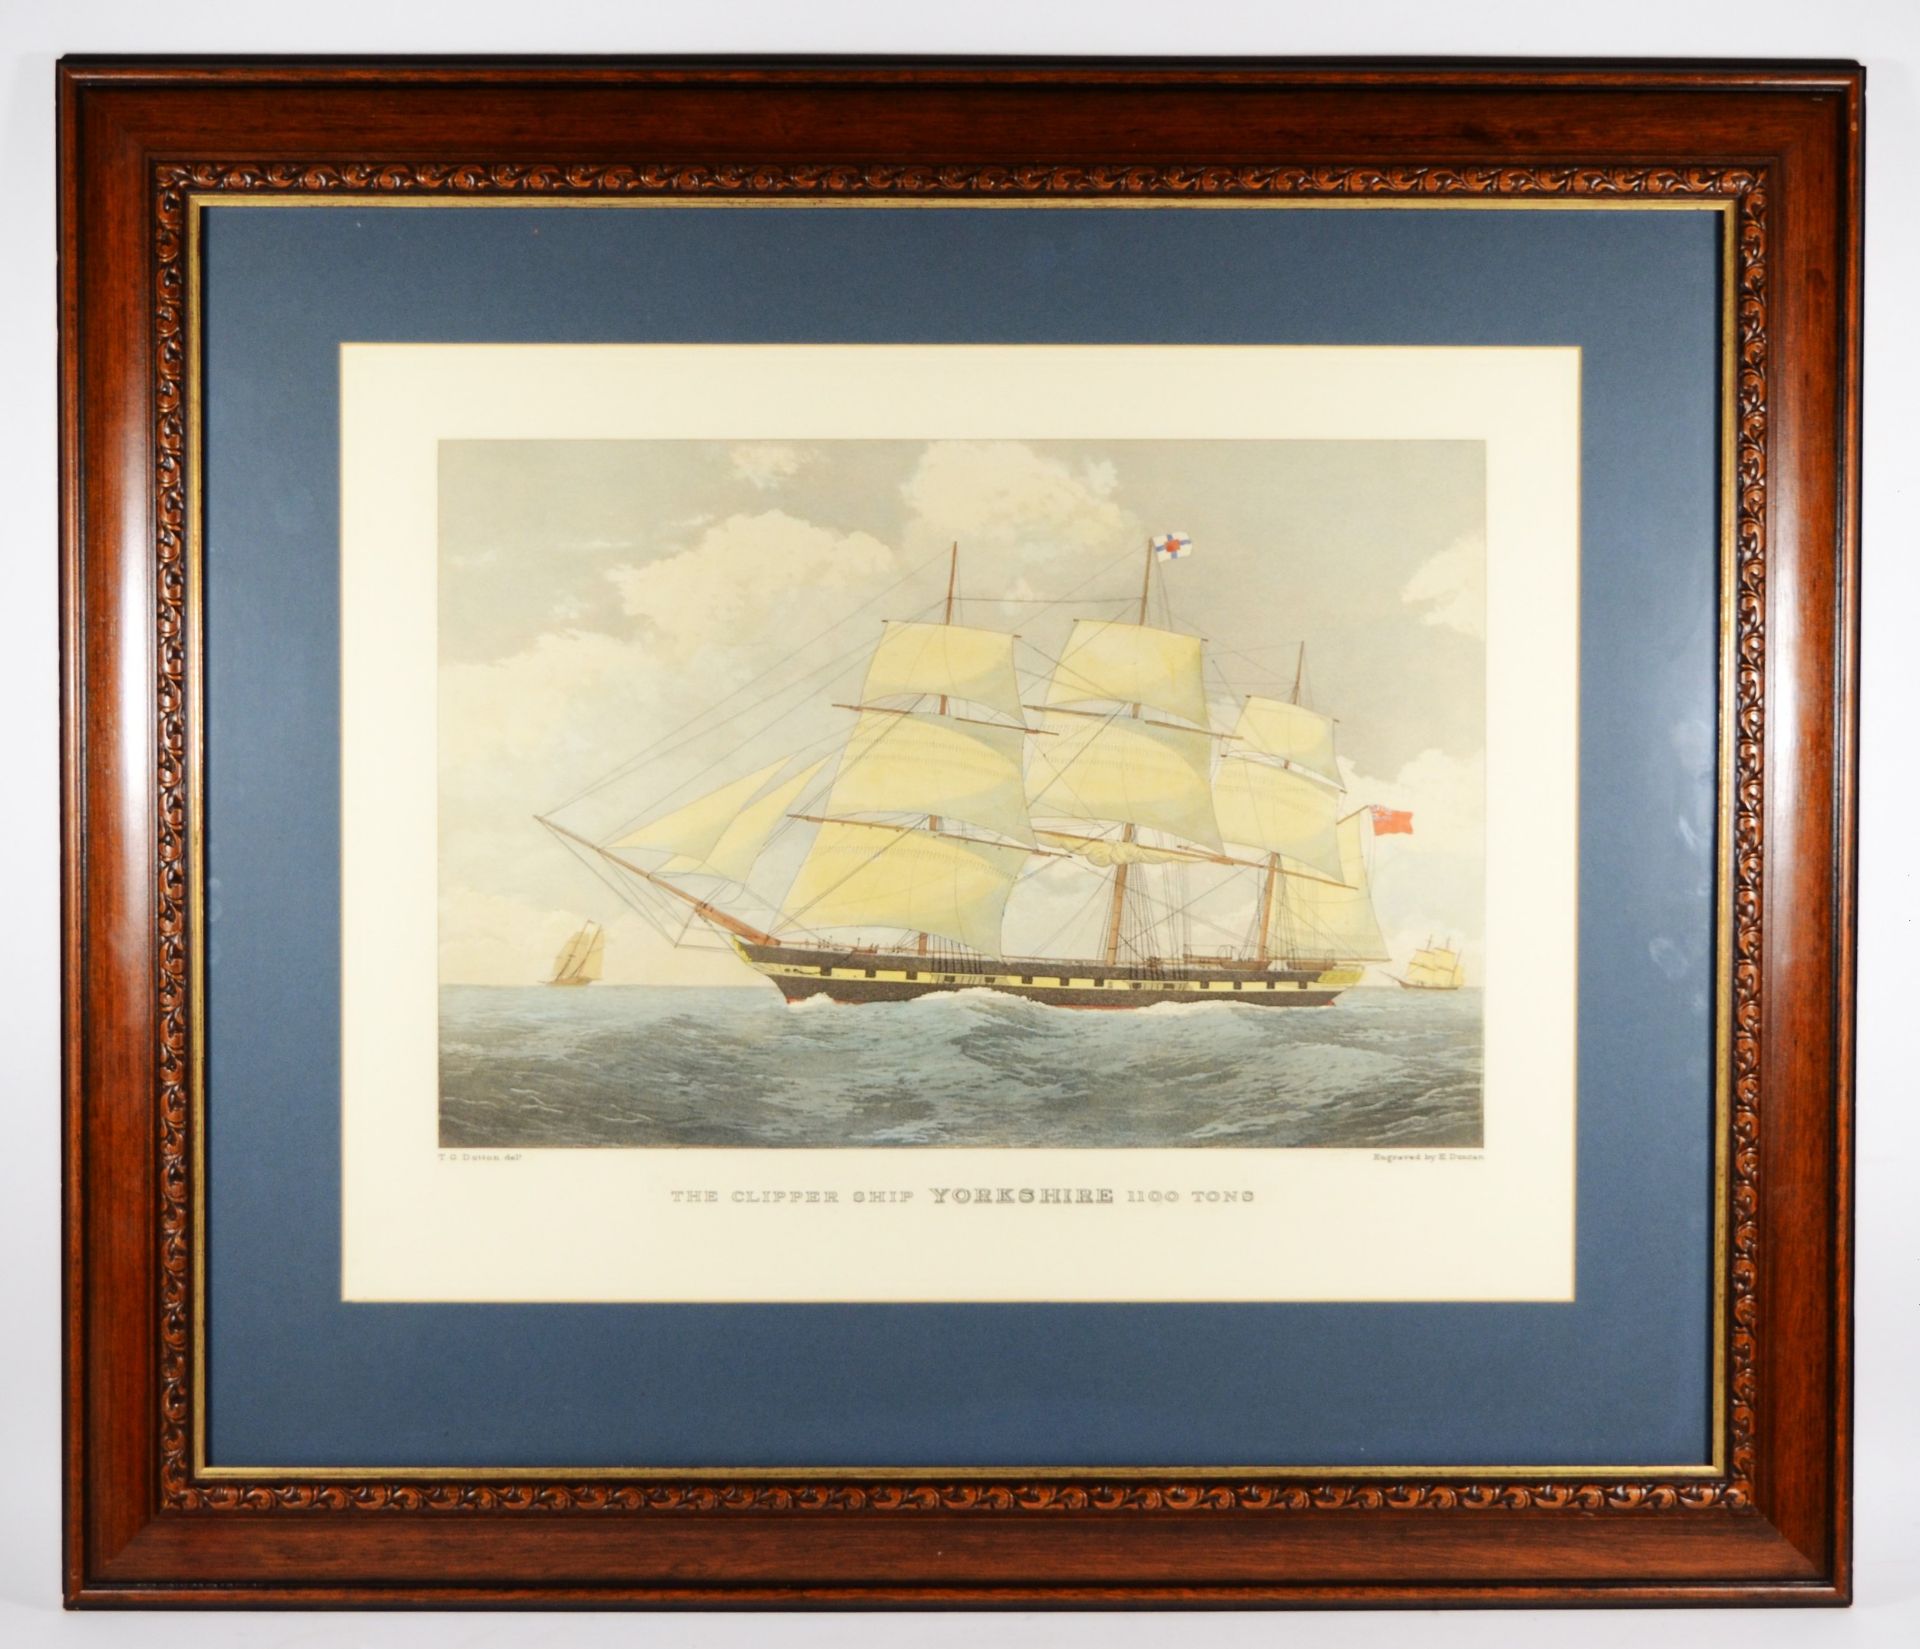 A engraving by E. Duncan, The Clipper Of Yorkshire 1100 Tons, mounted and framed, 80 x 67cm